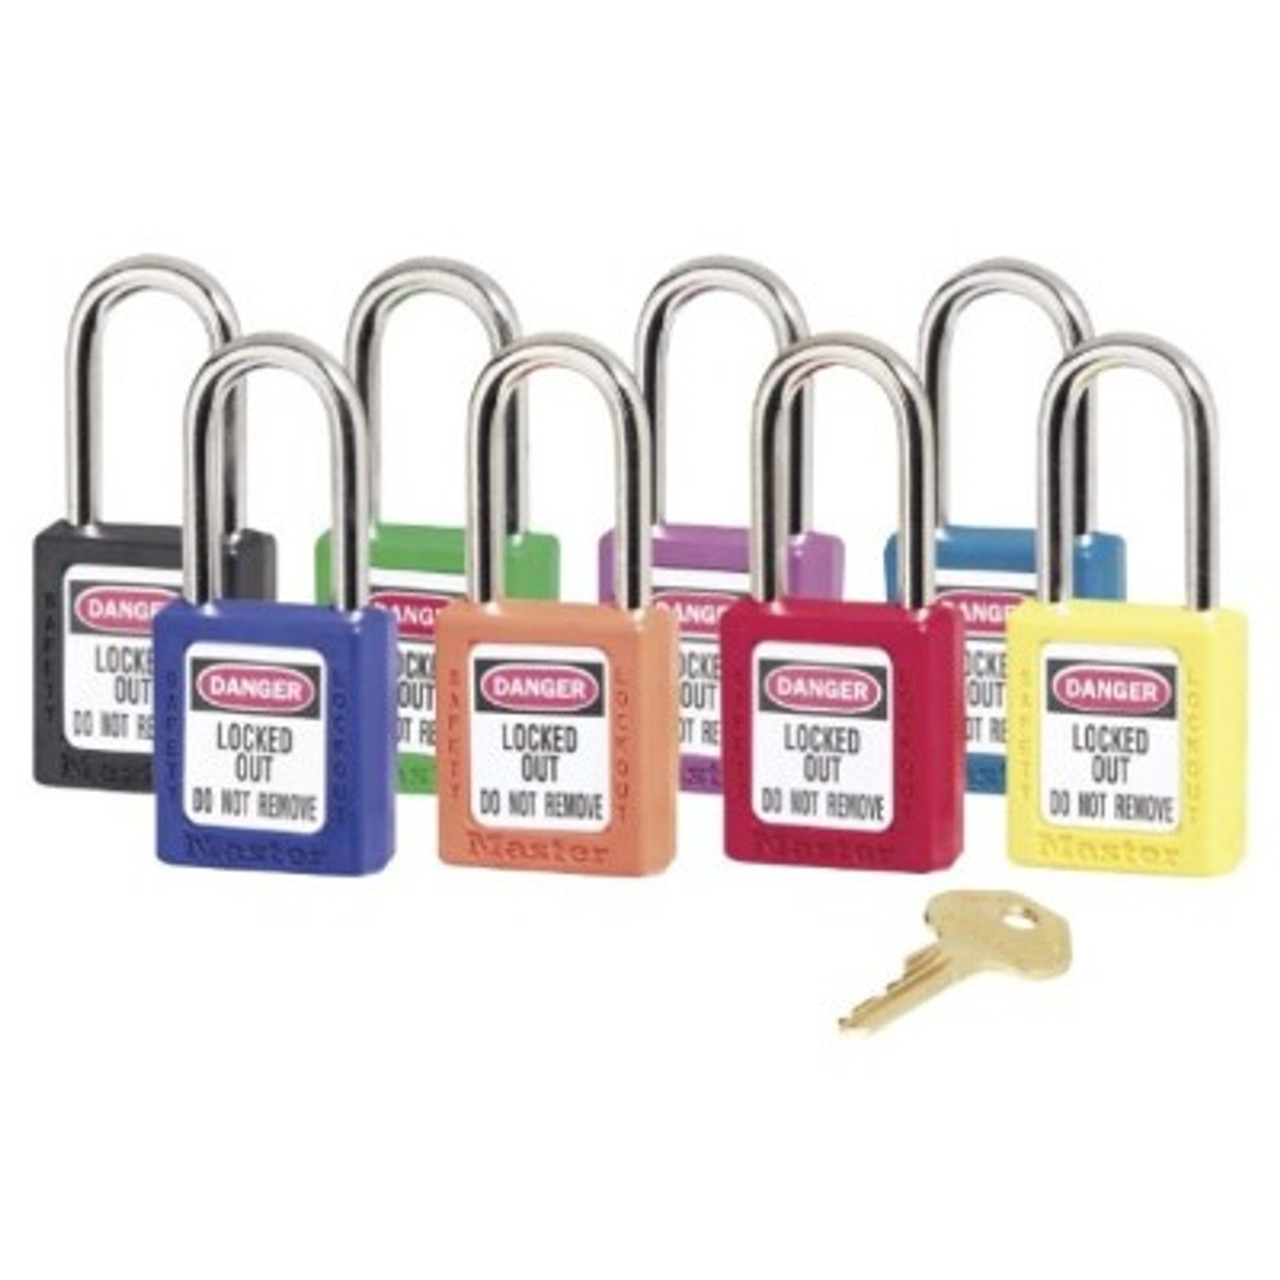 Master Lock 410 Safety Lockout Red